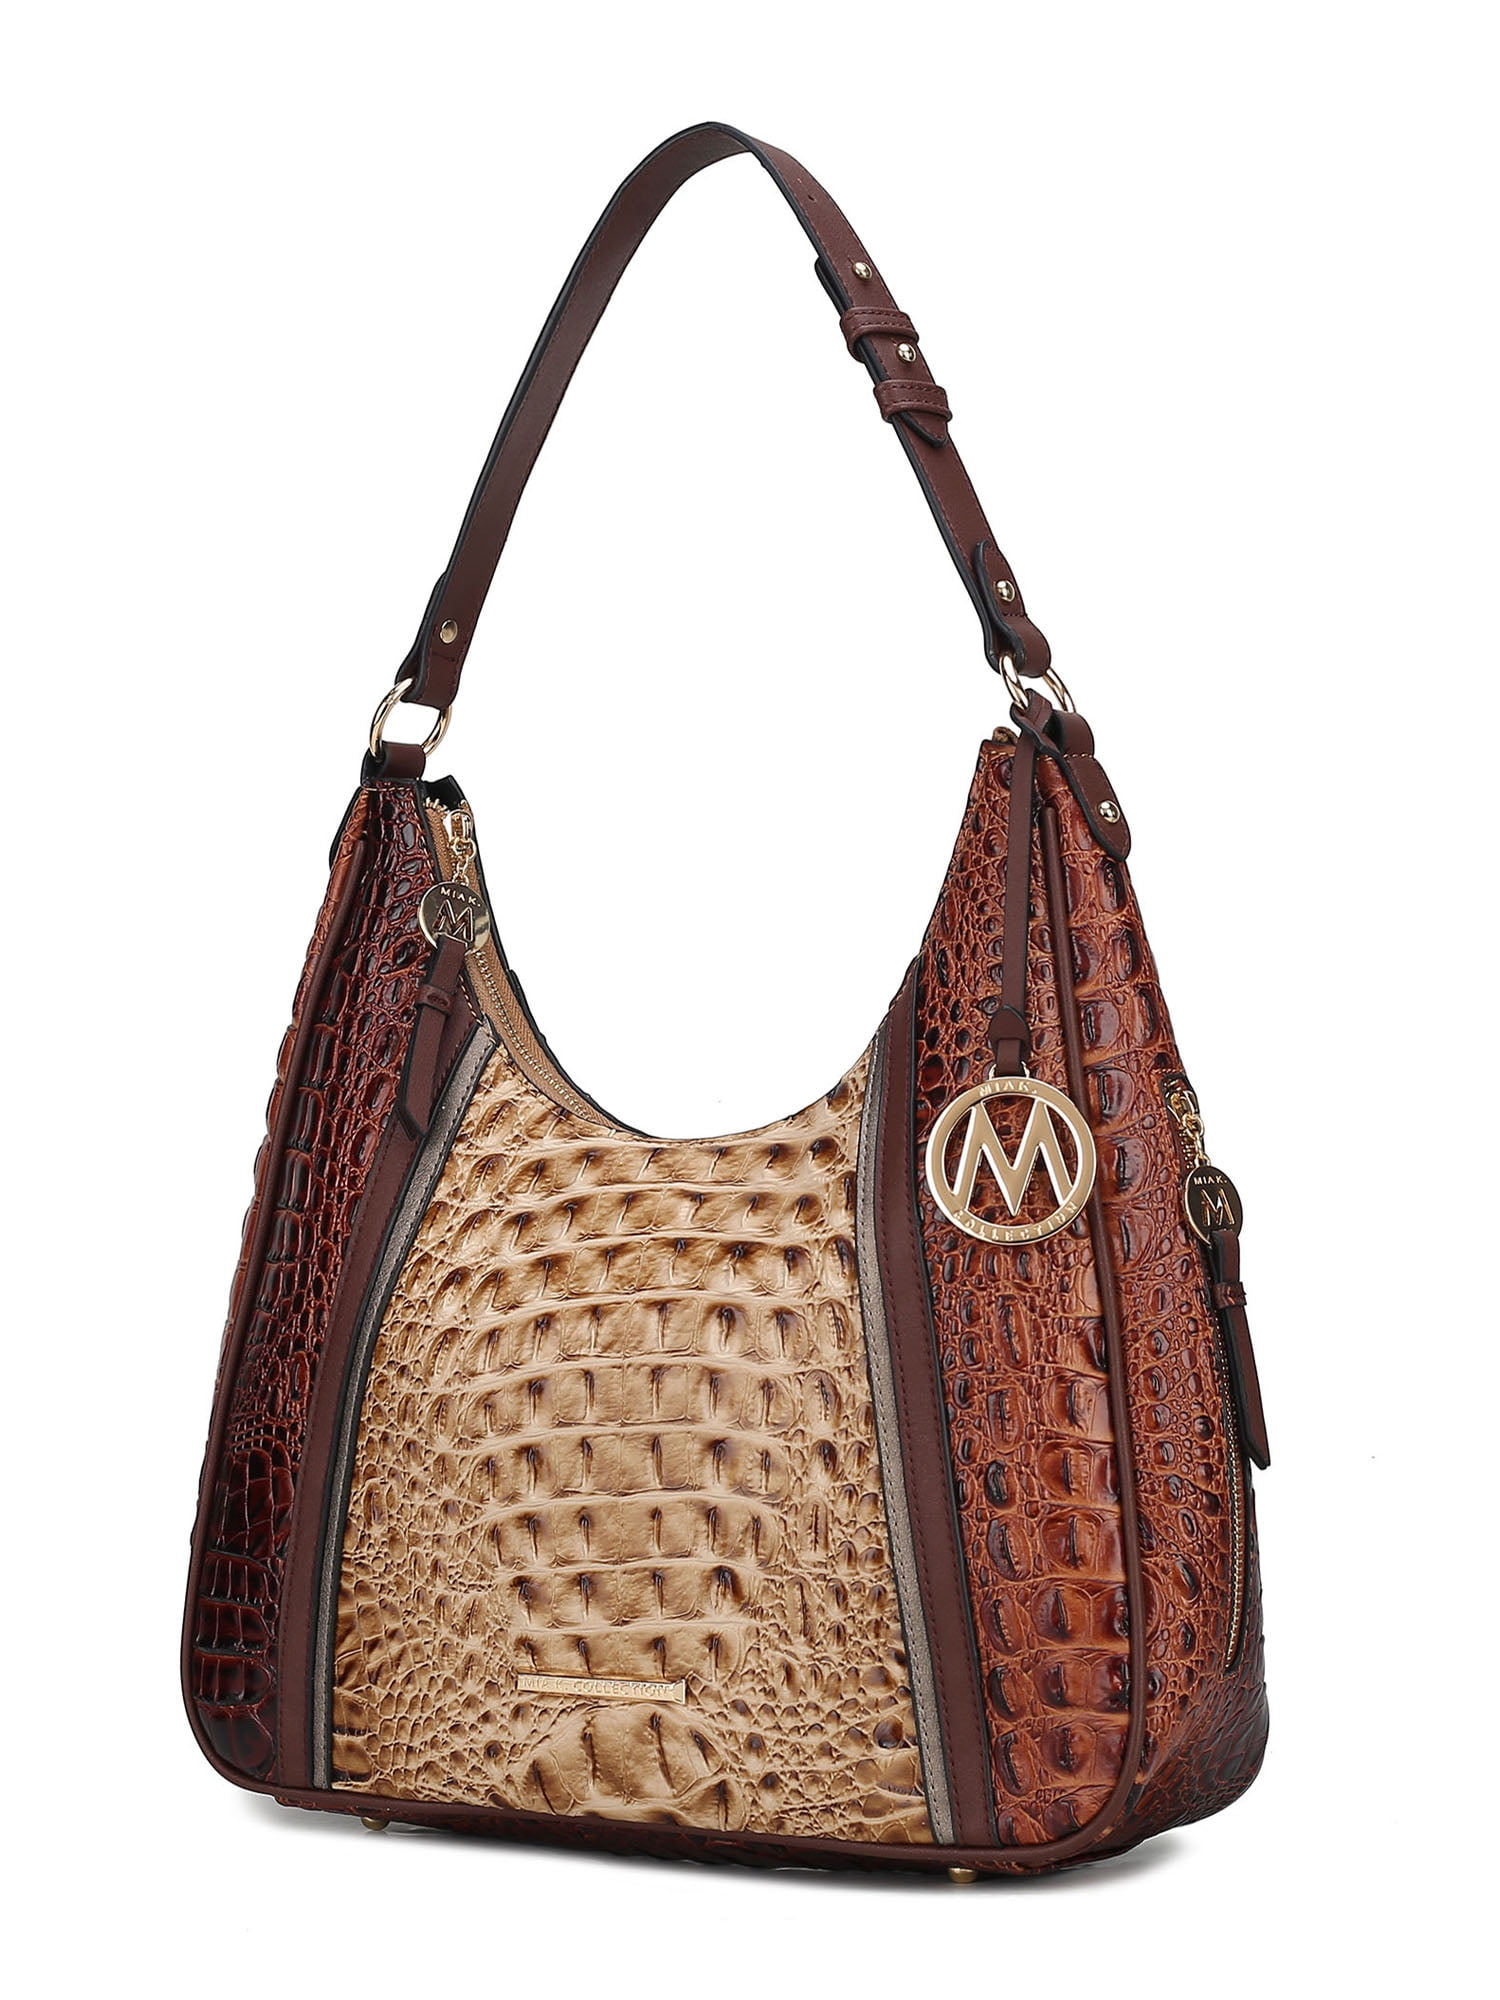 M St. Tote Bag in Caiman Croc Embossed Leather